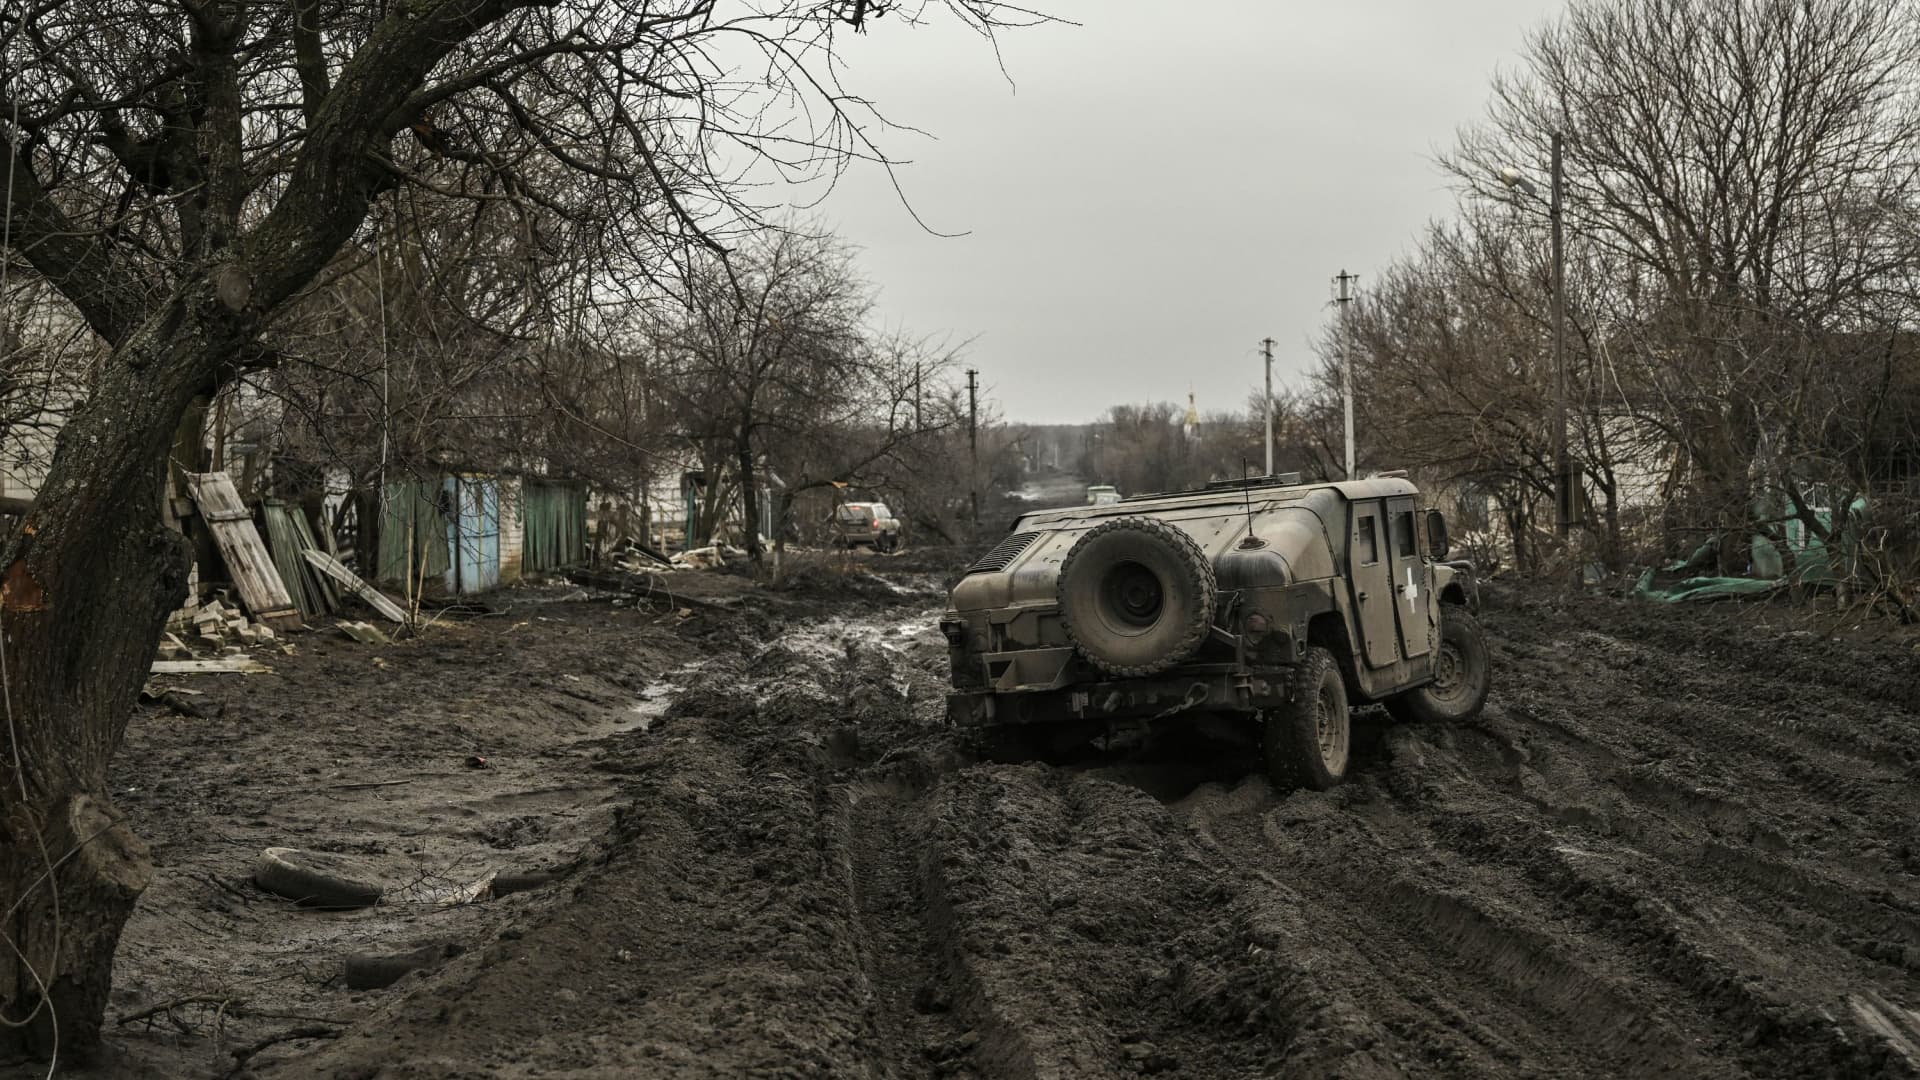 A Ukrainian armored vehicle drives on a muddy road near Bakhmut in the Donbas region, on March 9, 2023. 